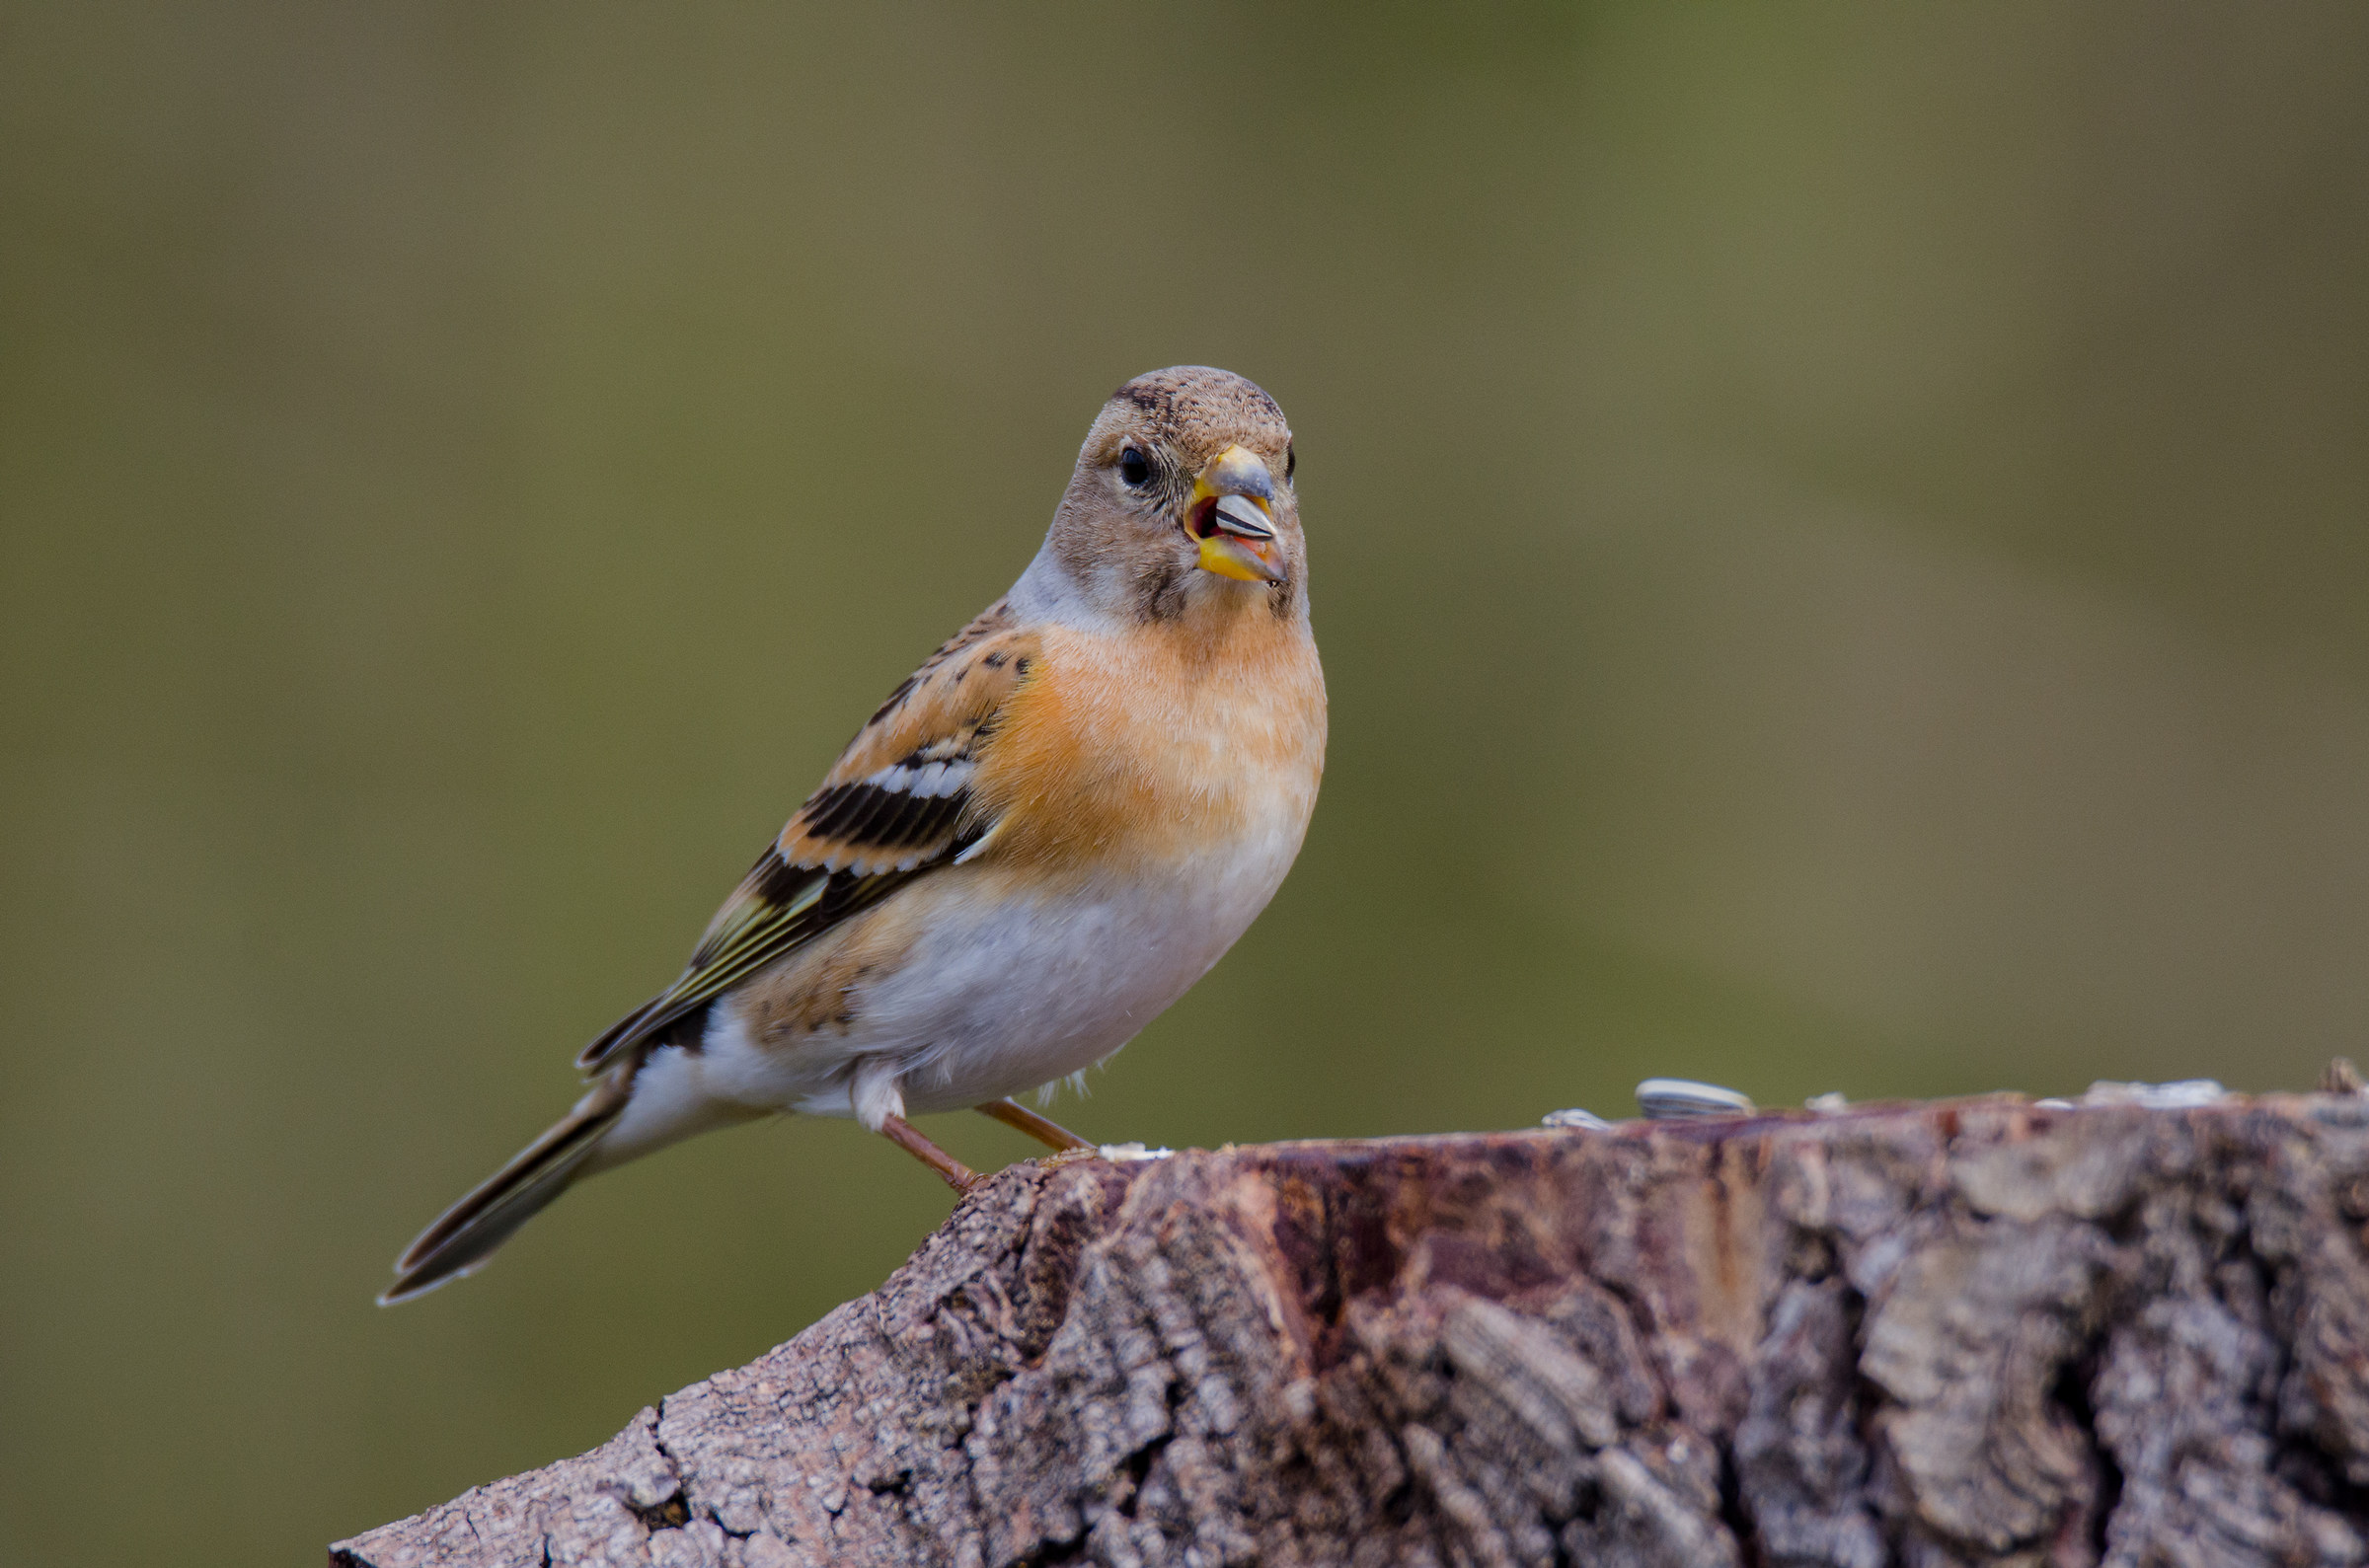 brambling in hd with d7000...